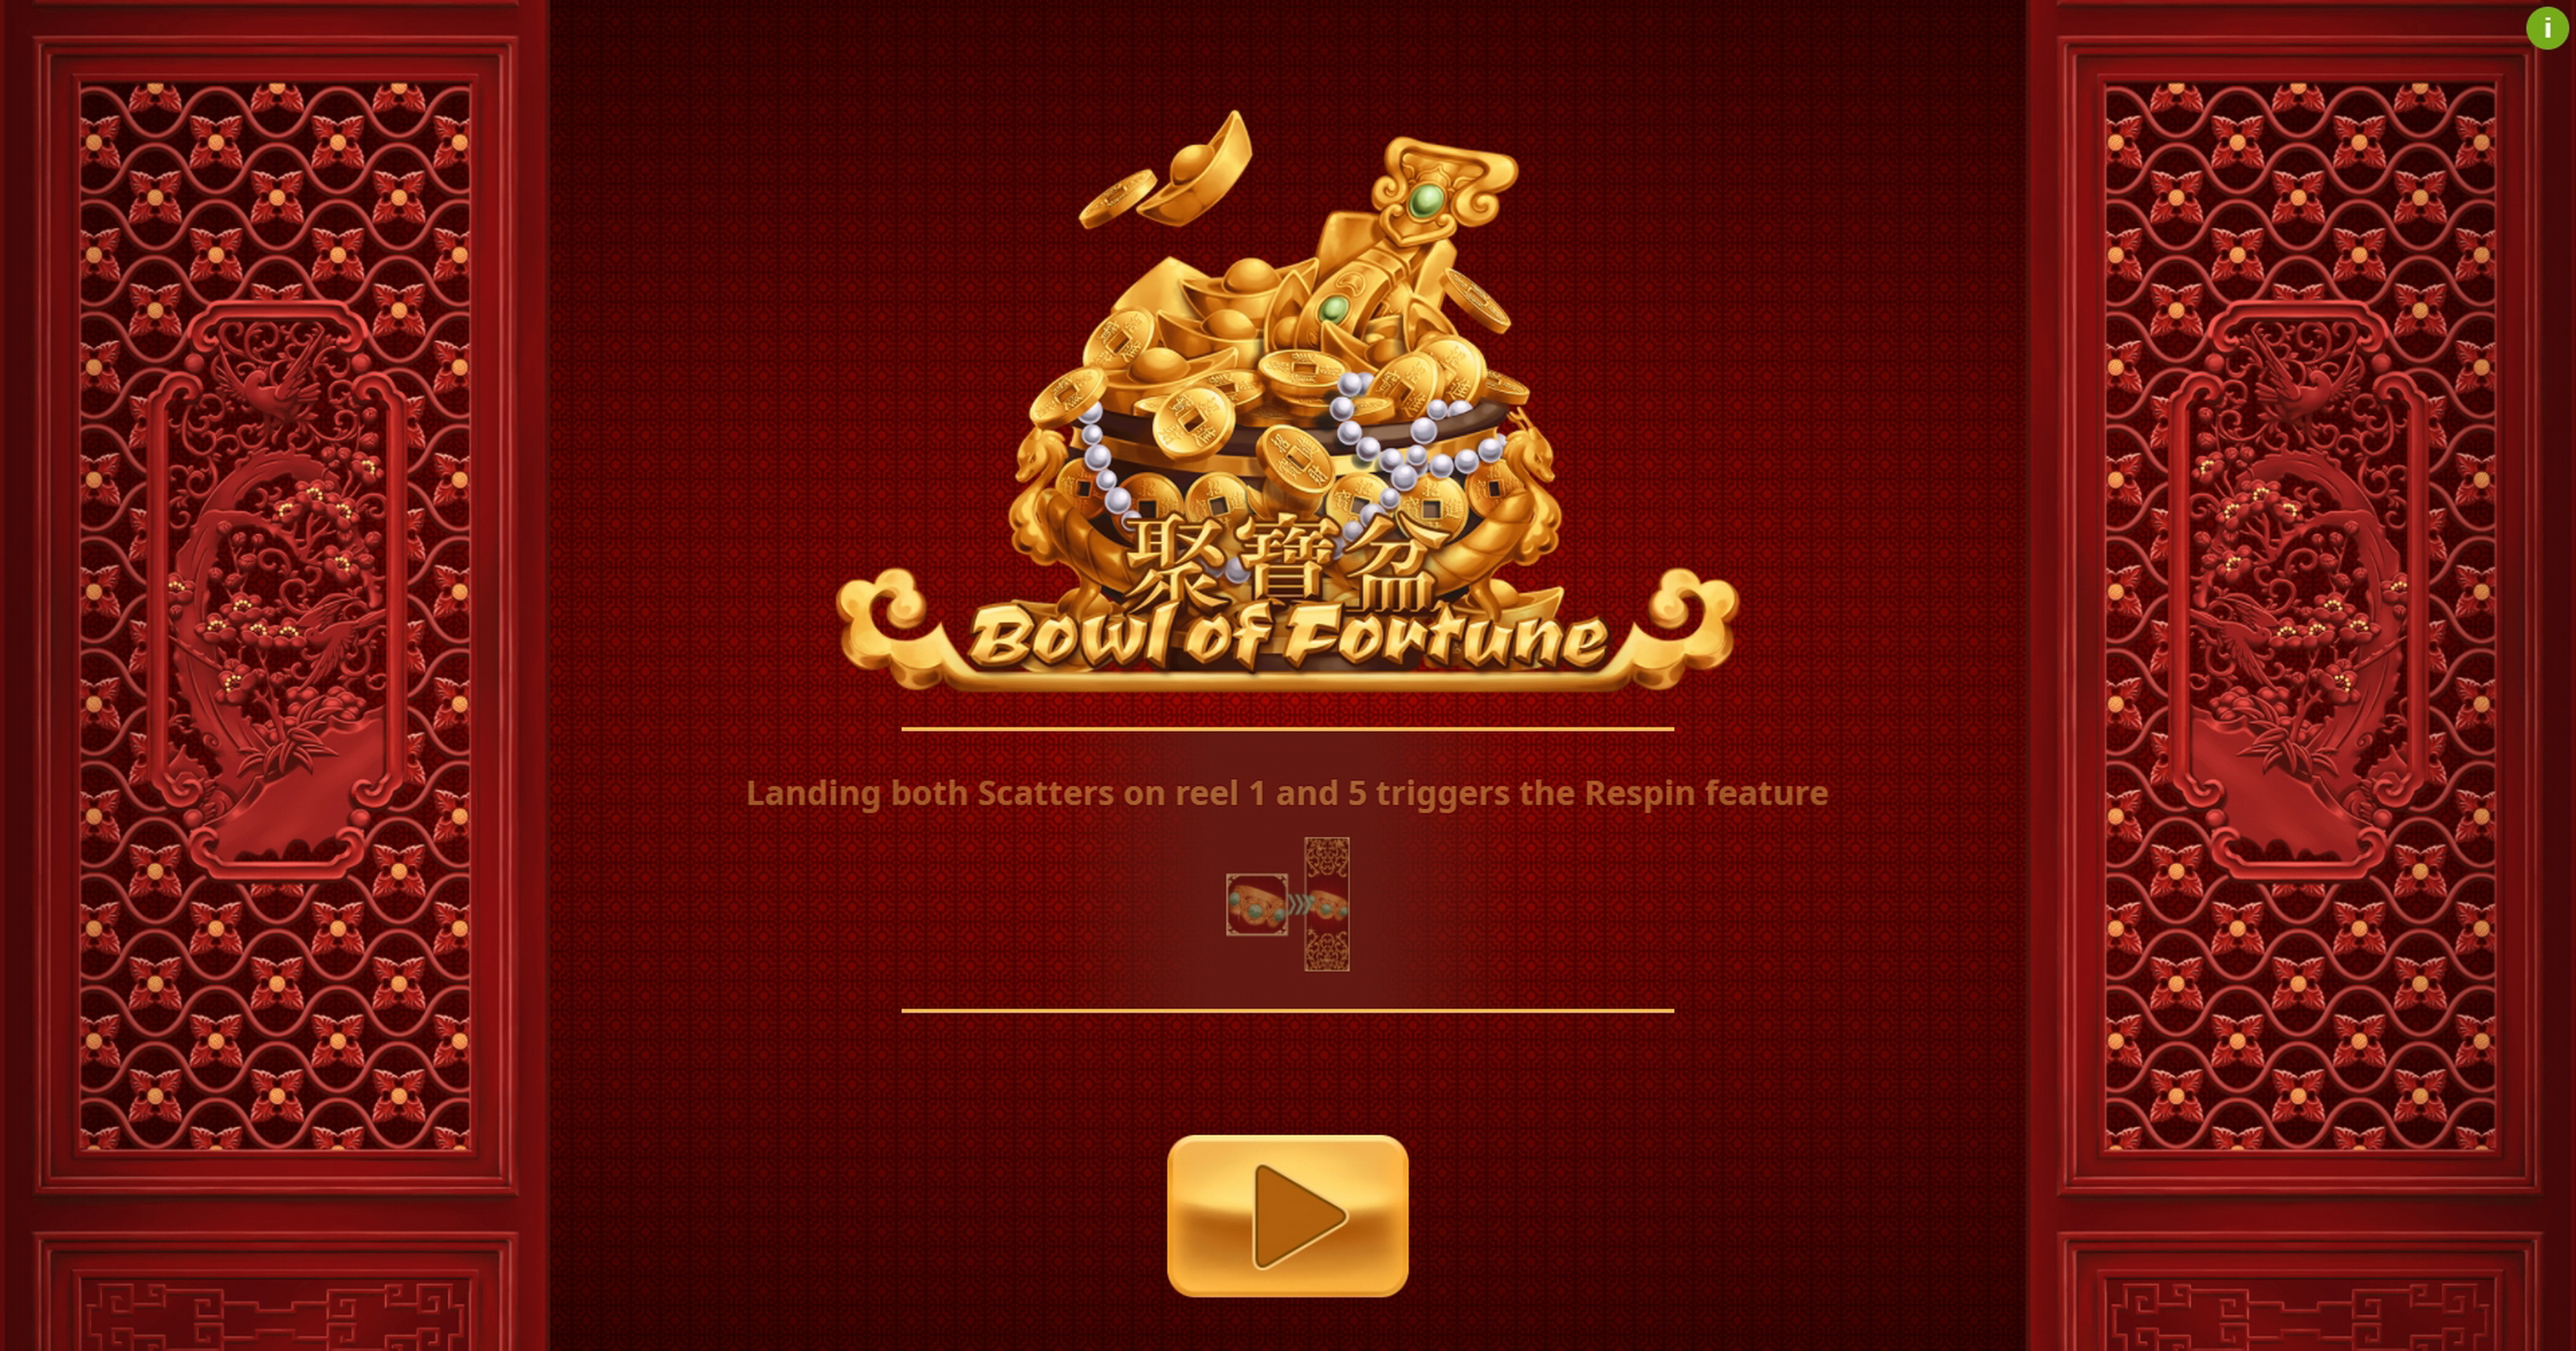 Play Bowl of Fortune Free Casino Slot Game by Ganapati